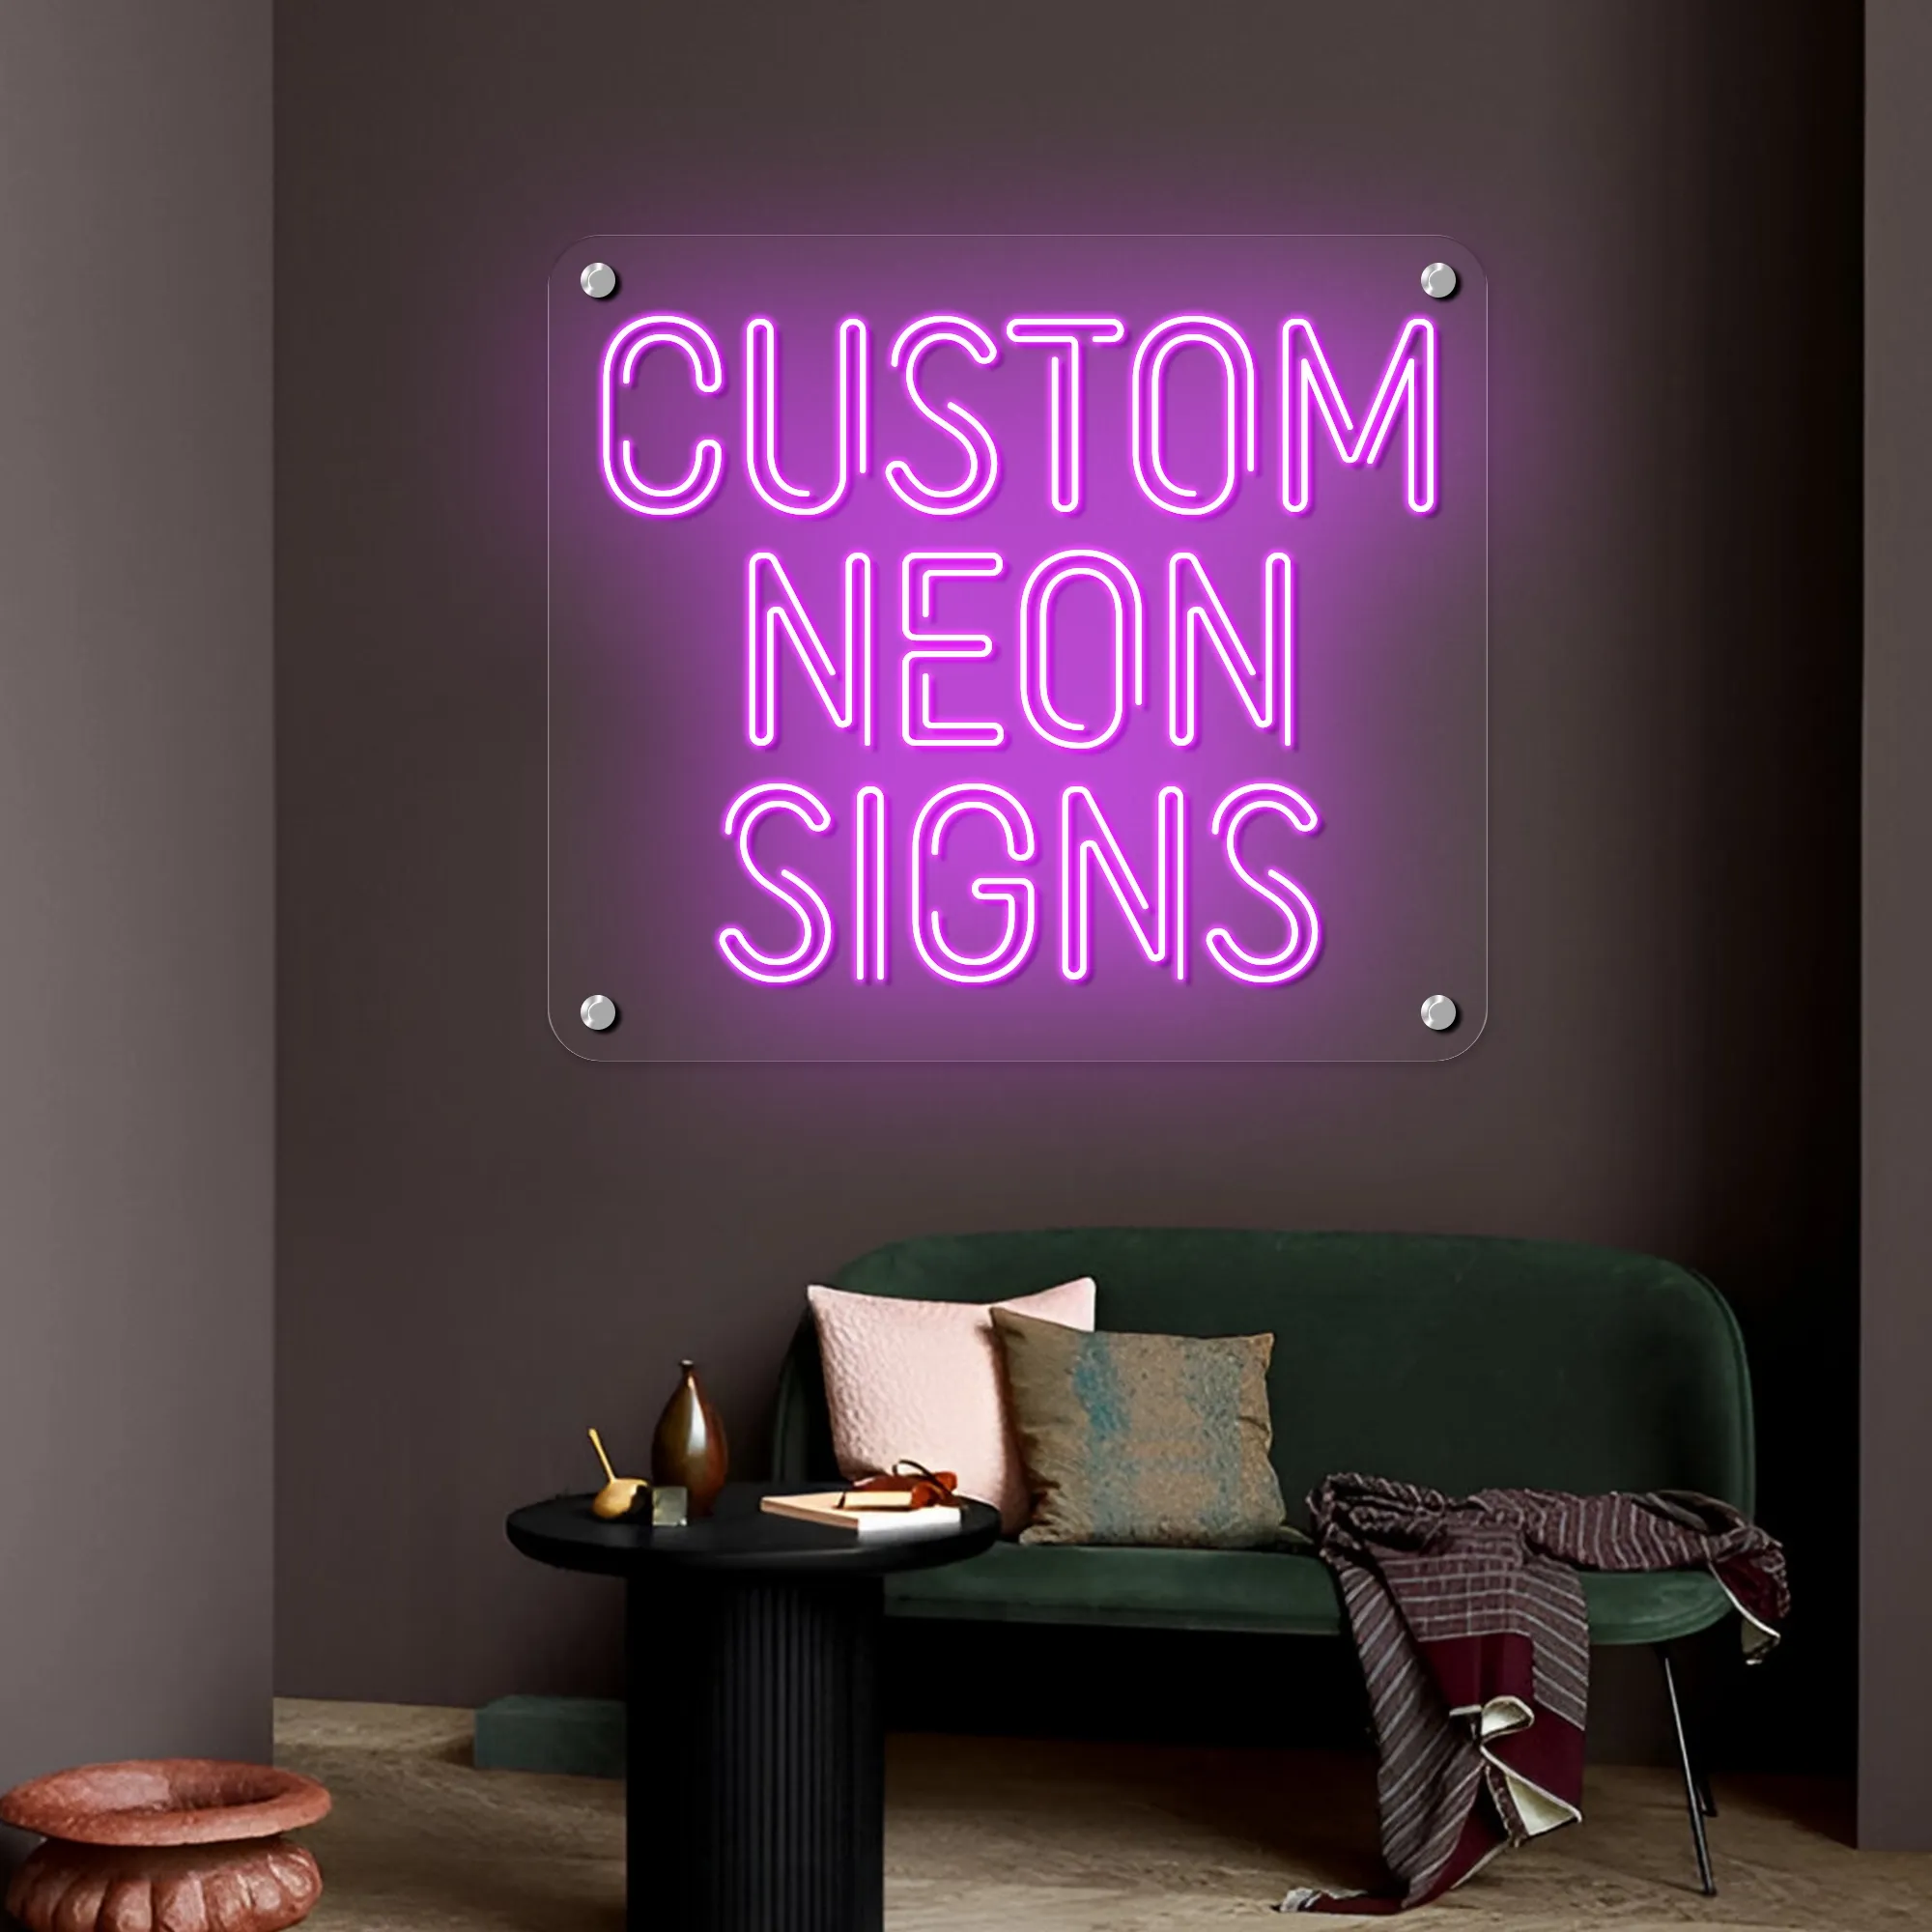 Neon Signs - Webcam Covers Now